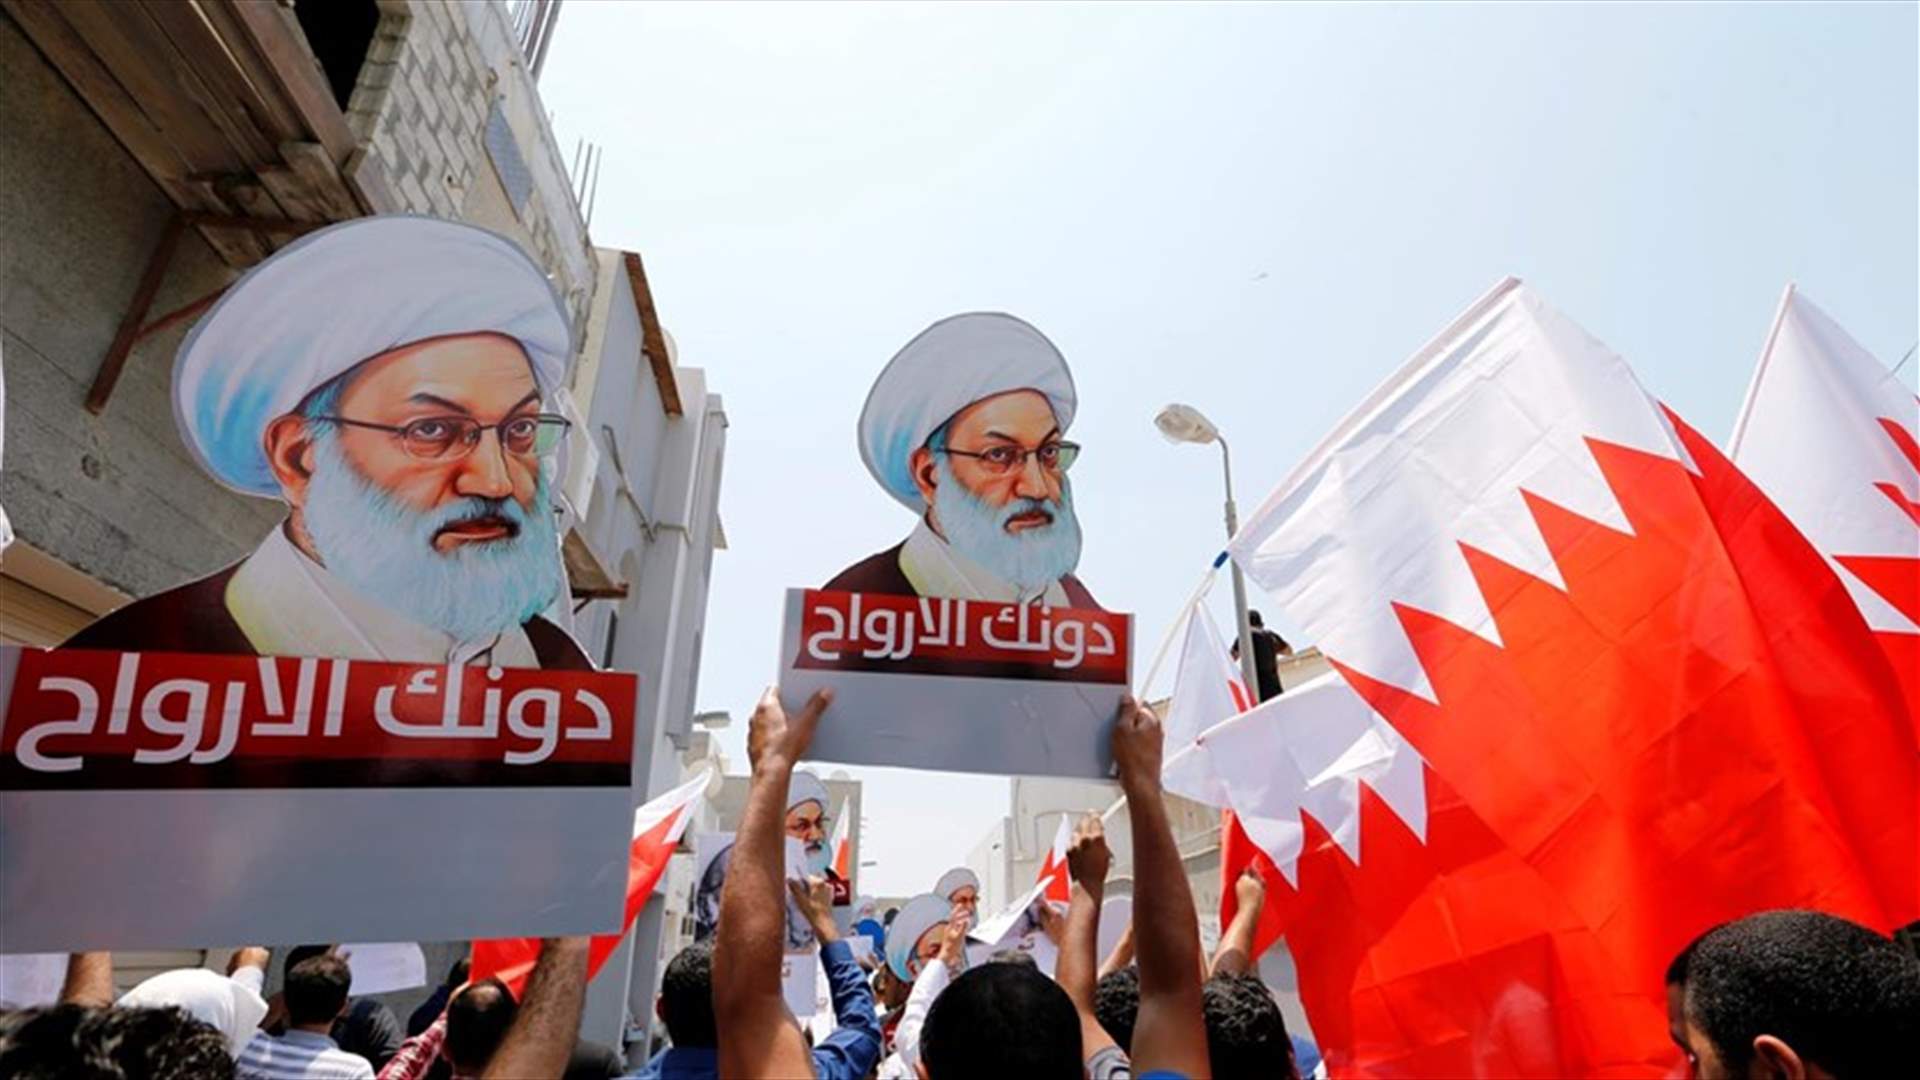 Bahrain sentences 167 people to prison in crackdown on dissent